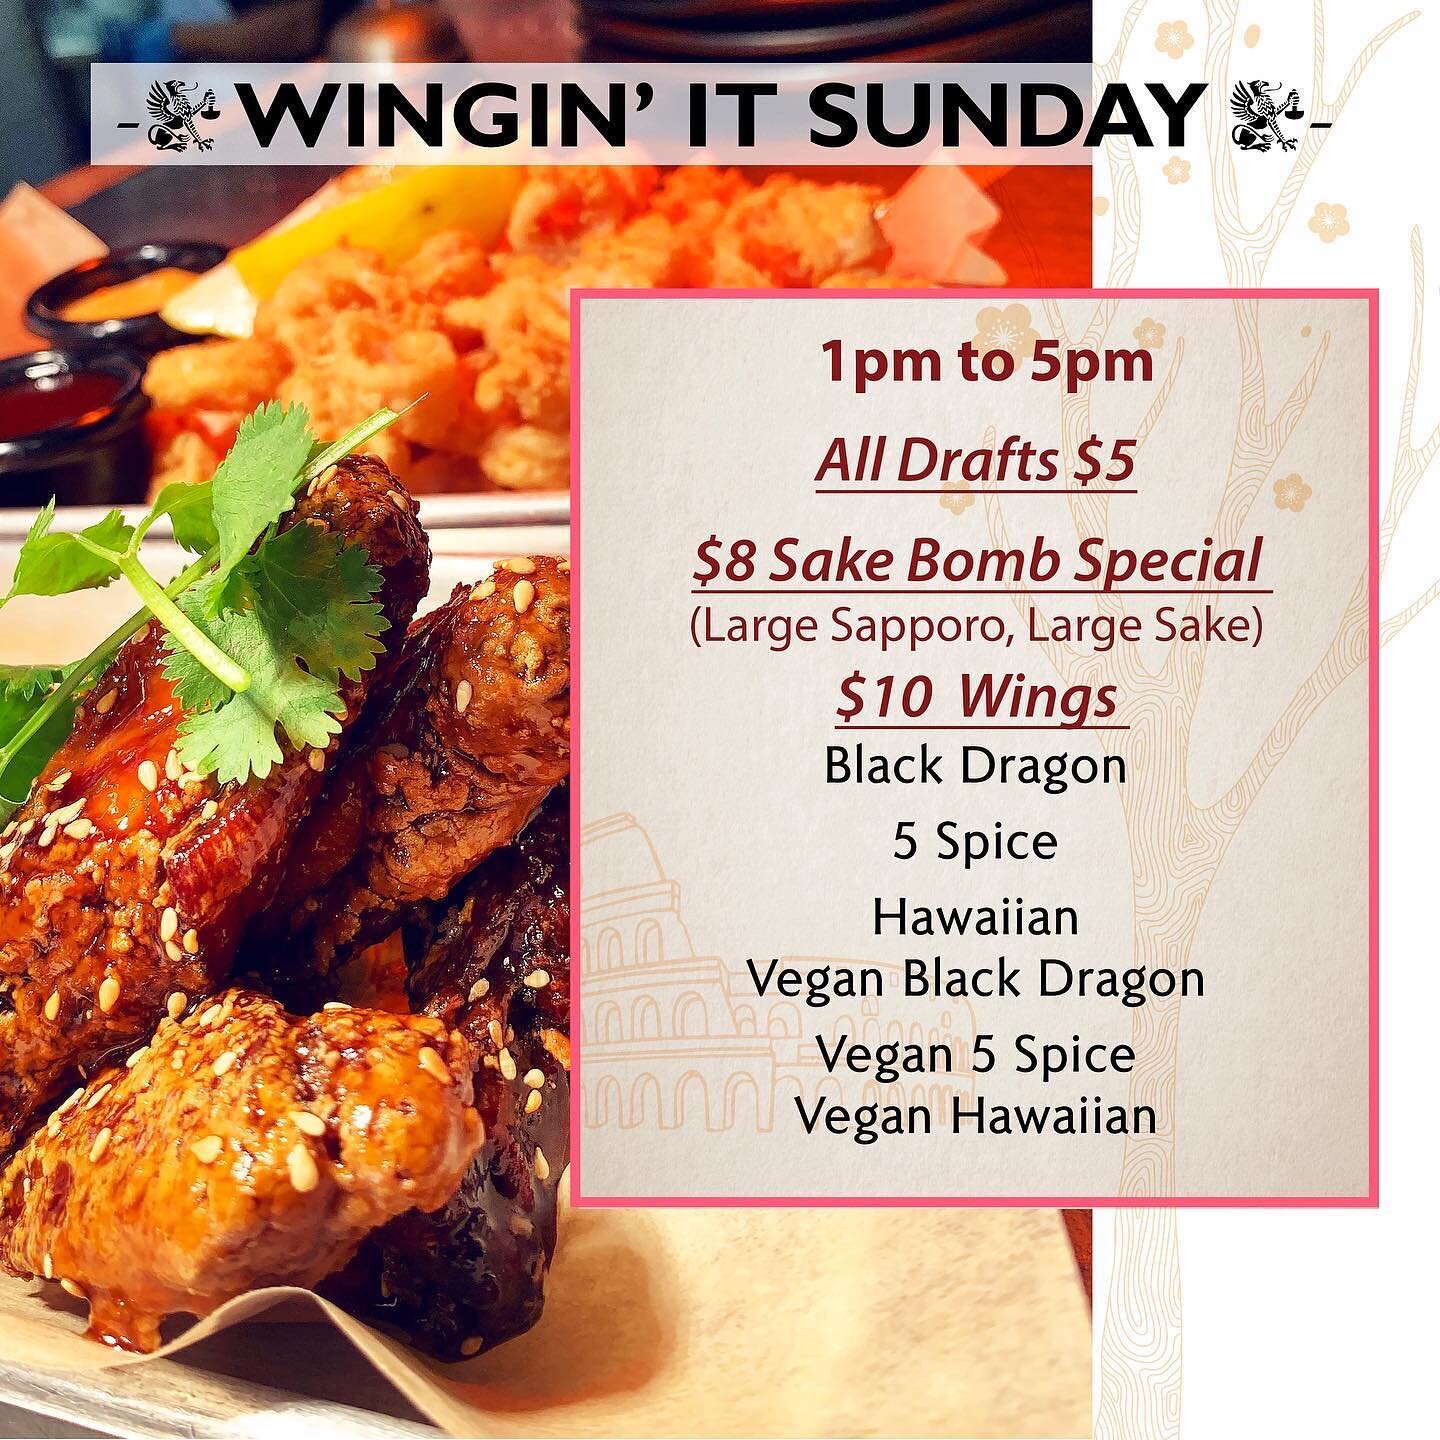 Look what we&rsquo;ve got for you from 1-5pm today! 🍗🍺🍶
.
.
.
#cinkuni #northparksandiego #sundayfunday #northparksd #elcajonblvd #wings #chickenwings #japanesefusion #italianfood #womanownedbusiness #supportsmallbusiness #northpark #buffalowings 